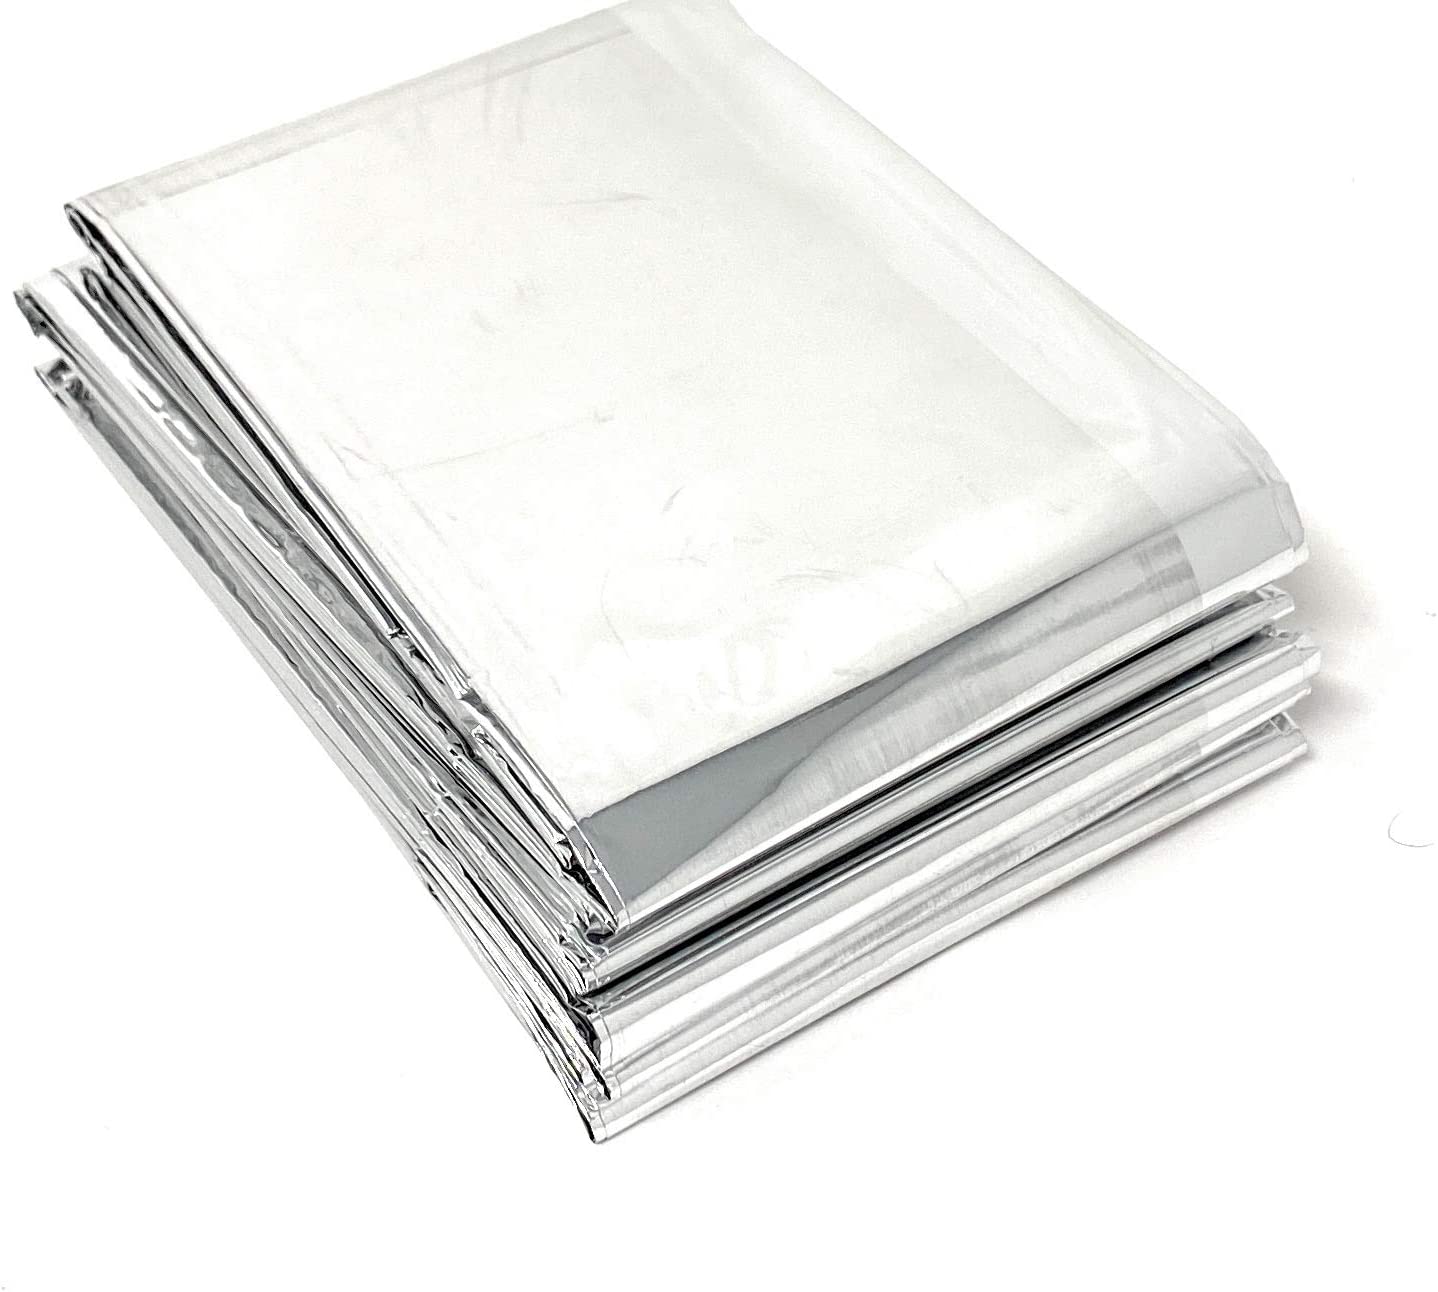 Lot of 50 Emergency Foil Mylar Thermal Blanket , 52" x 84", Useful for Homeless care , Charity,natural disasters, hurricane relief, emergency supplies (each Individually wrapped)